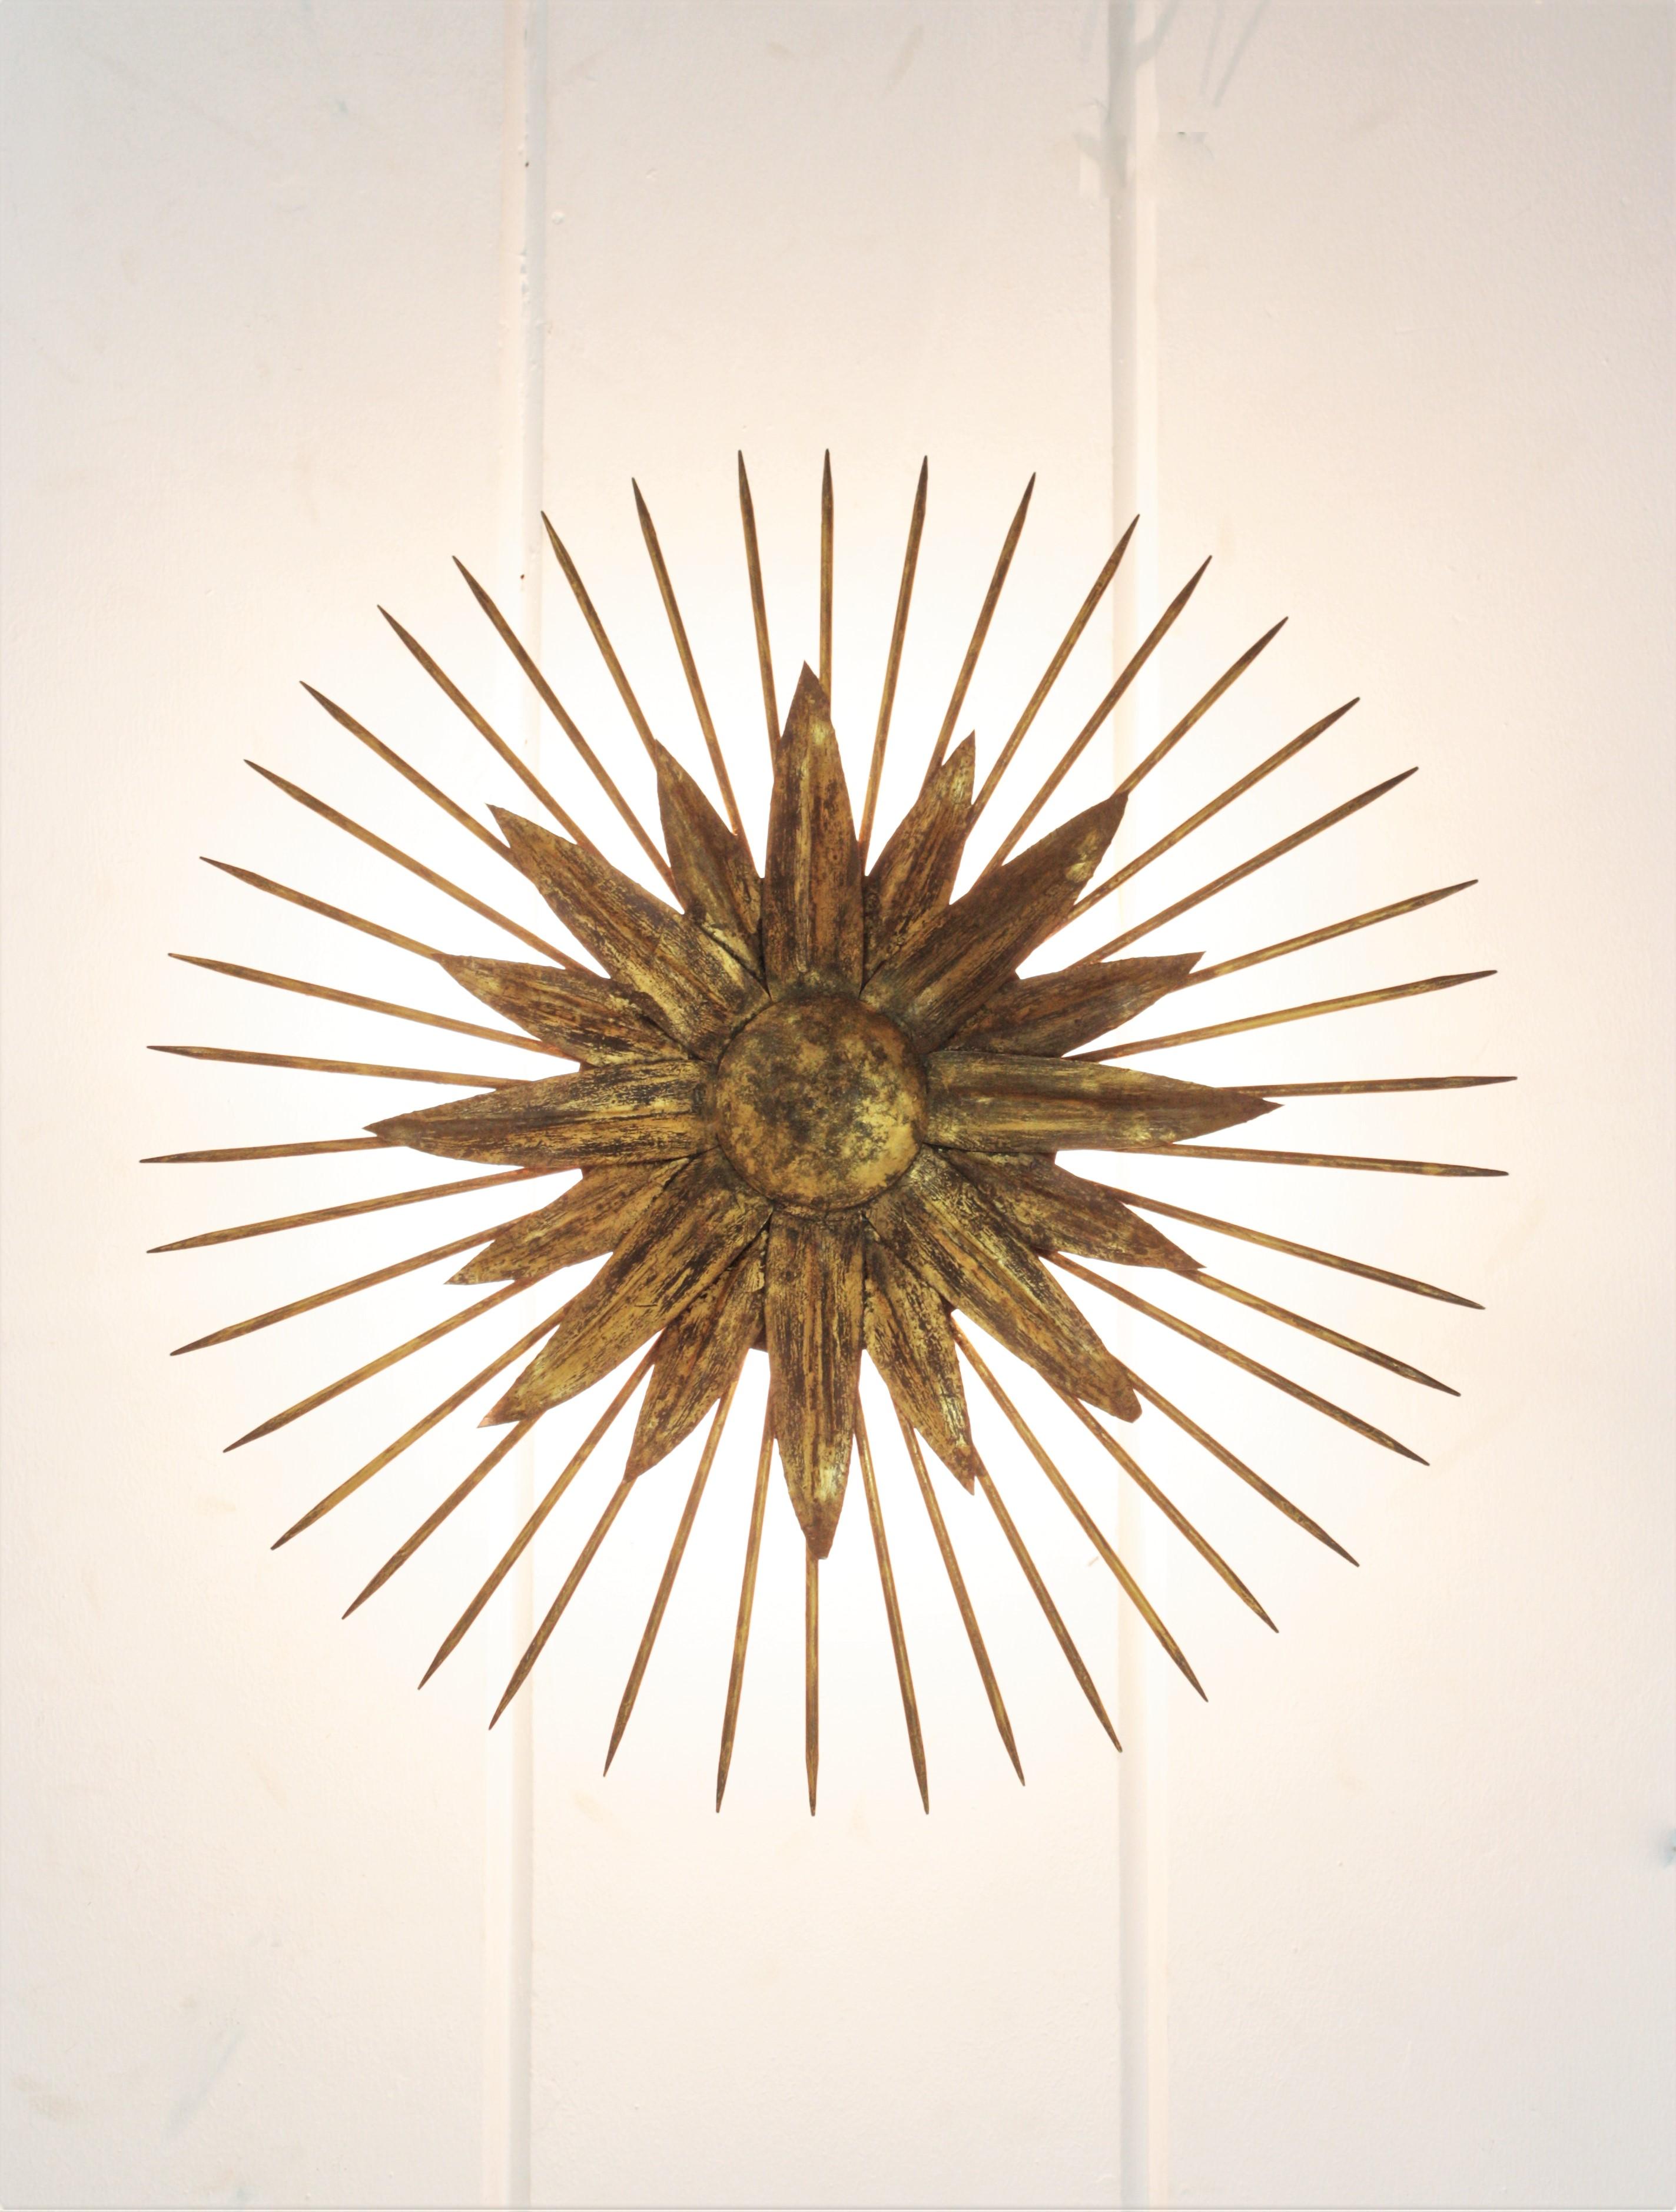 French Sunburst Light Fixture in Gilt Iron with Nail Detail, 1940s For Sale 6